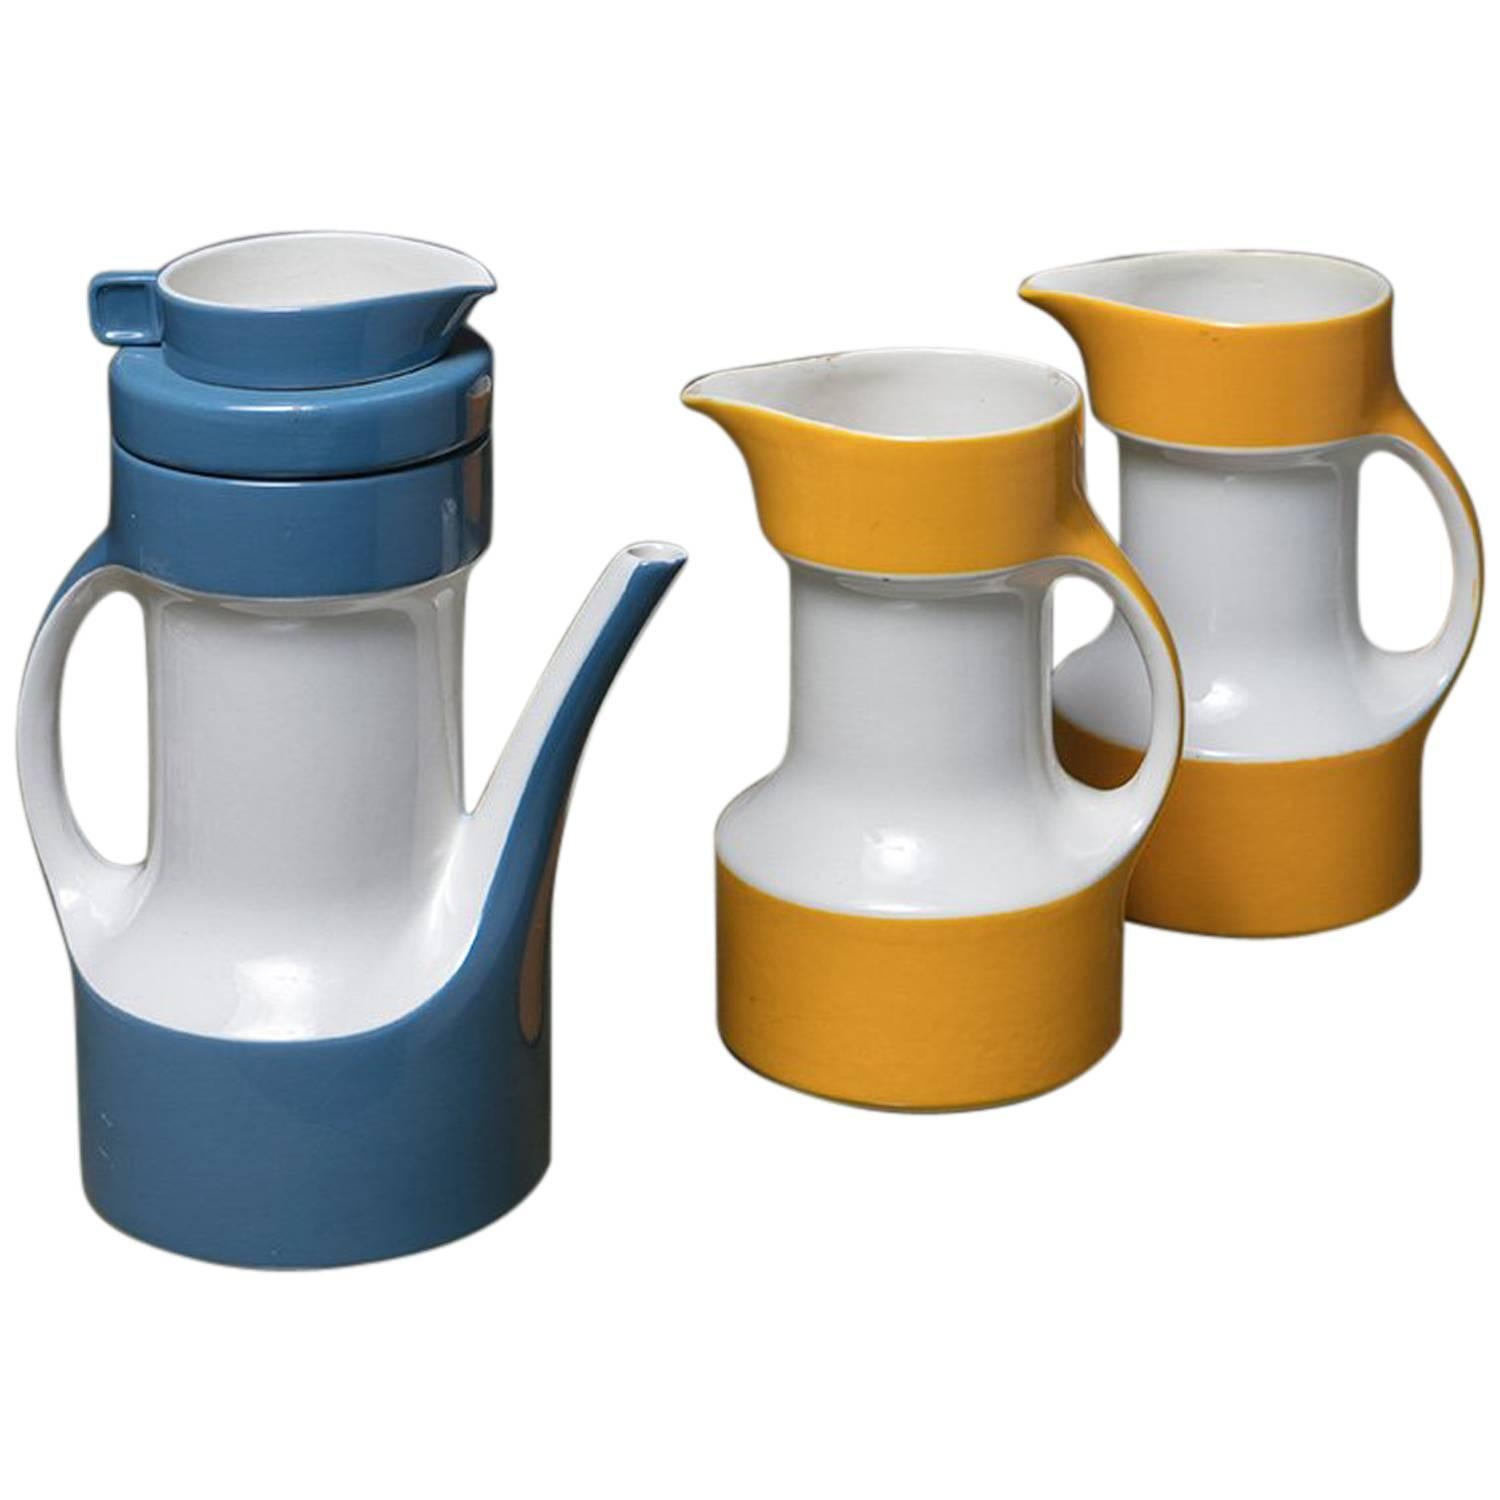 Set of Three Pitchers by Ceramica Pagnossin